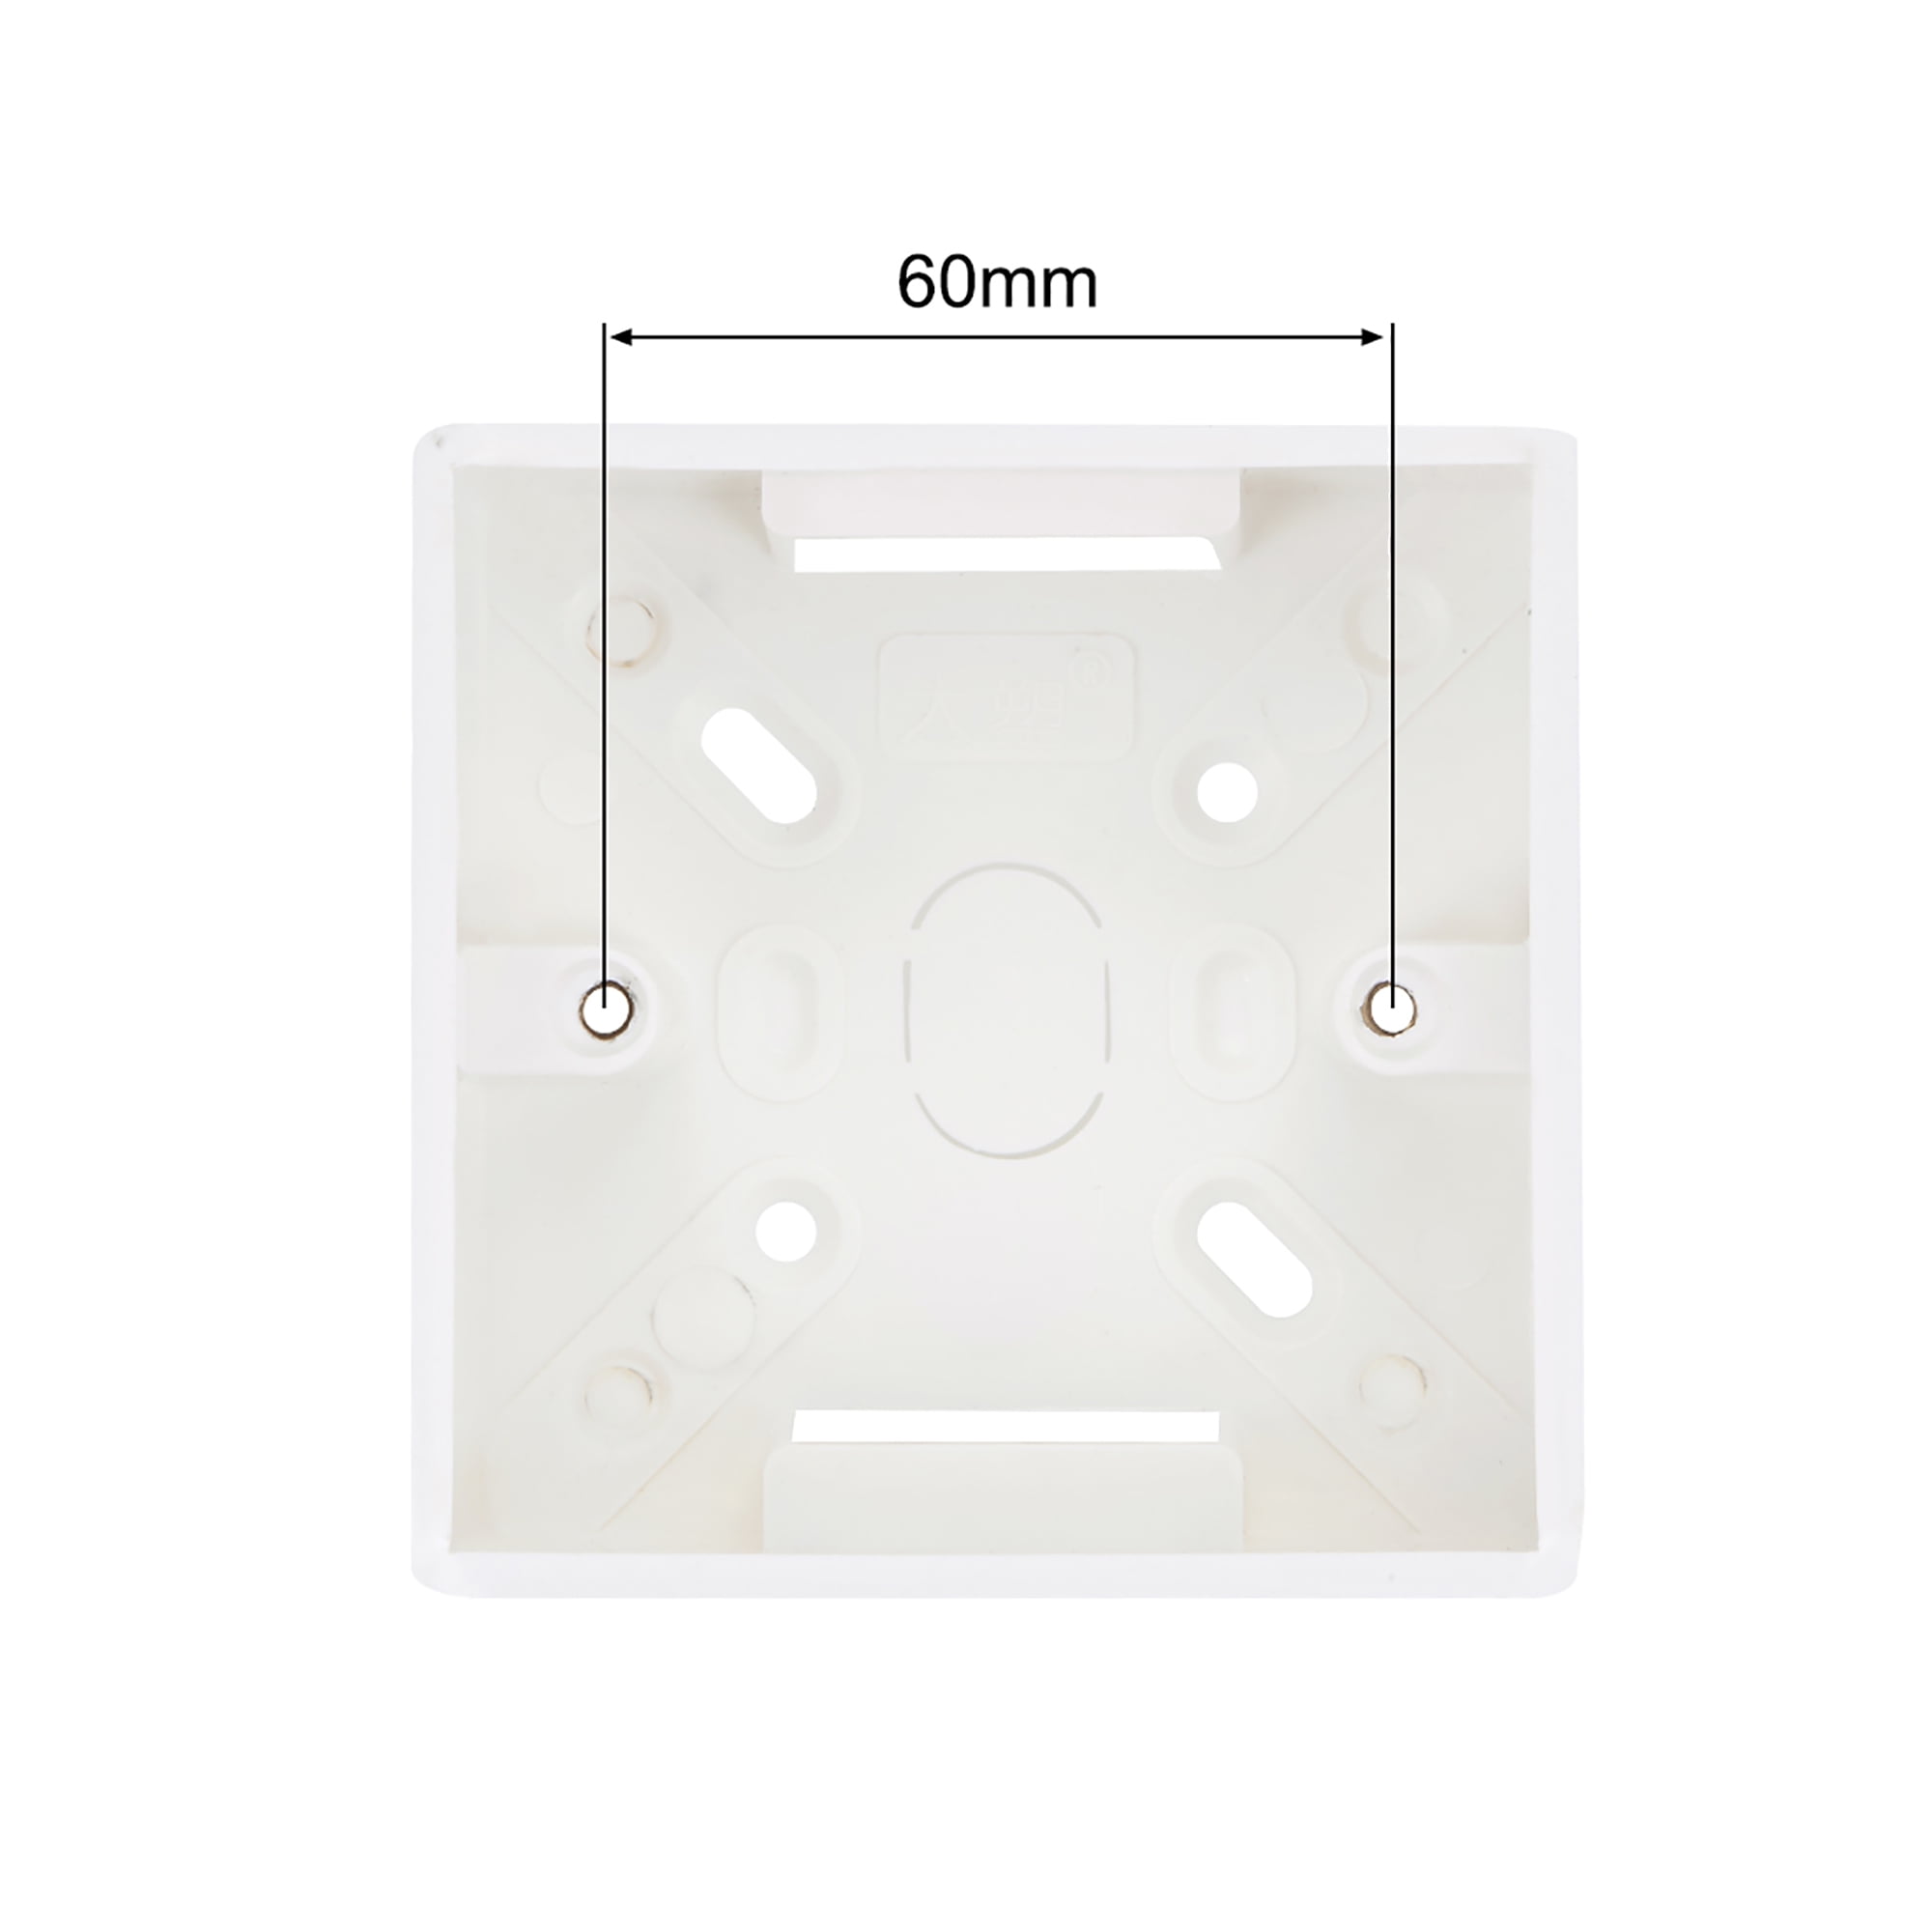 Details about   Wall Switch Box Deep Case Recessed Mount 86 Type Single Gang White 87*87*42 1pcs